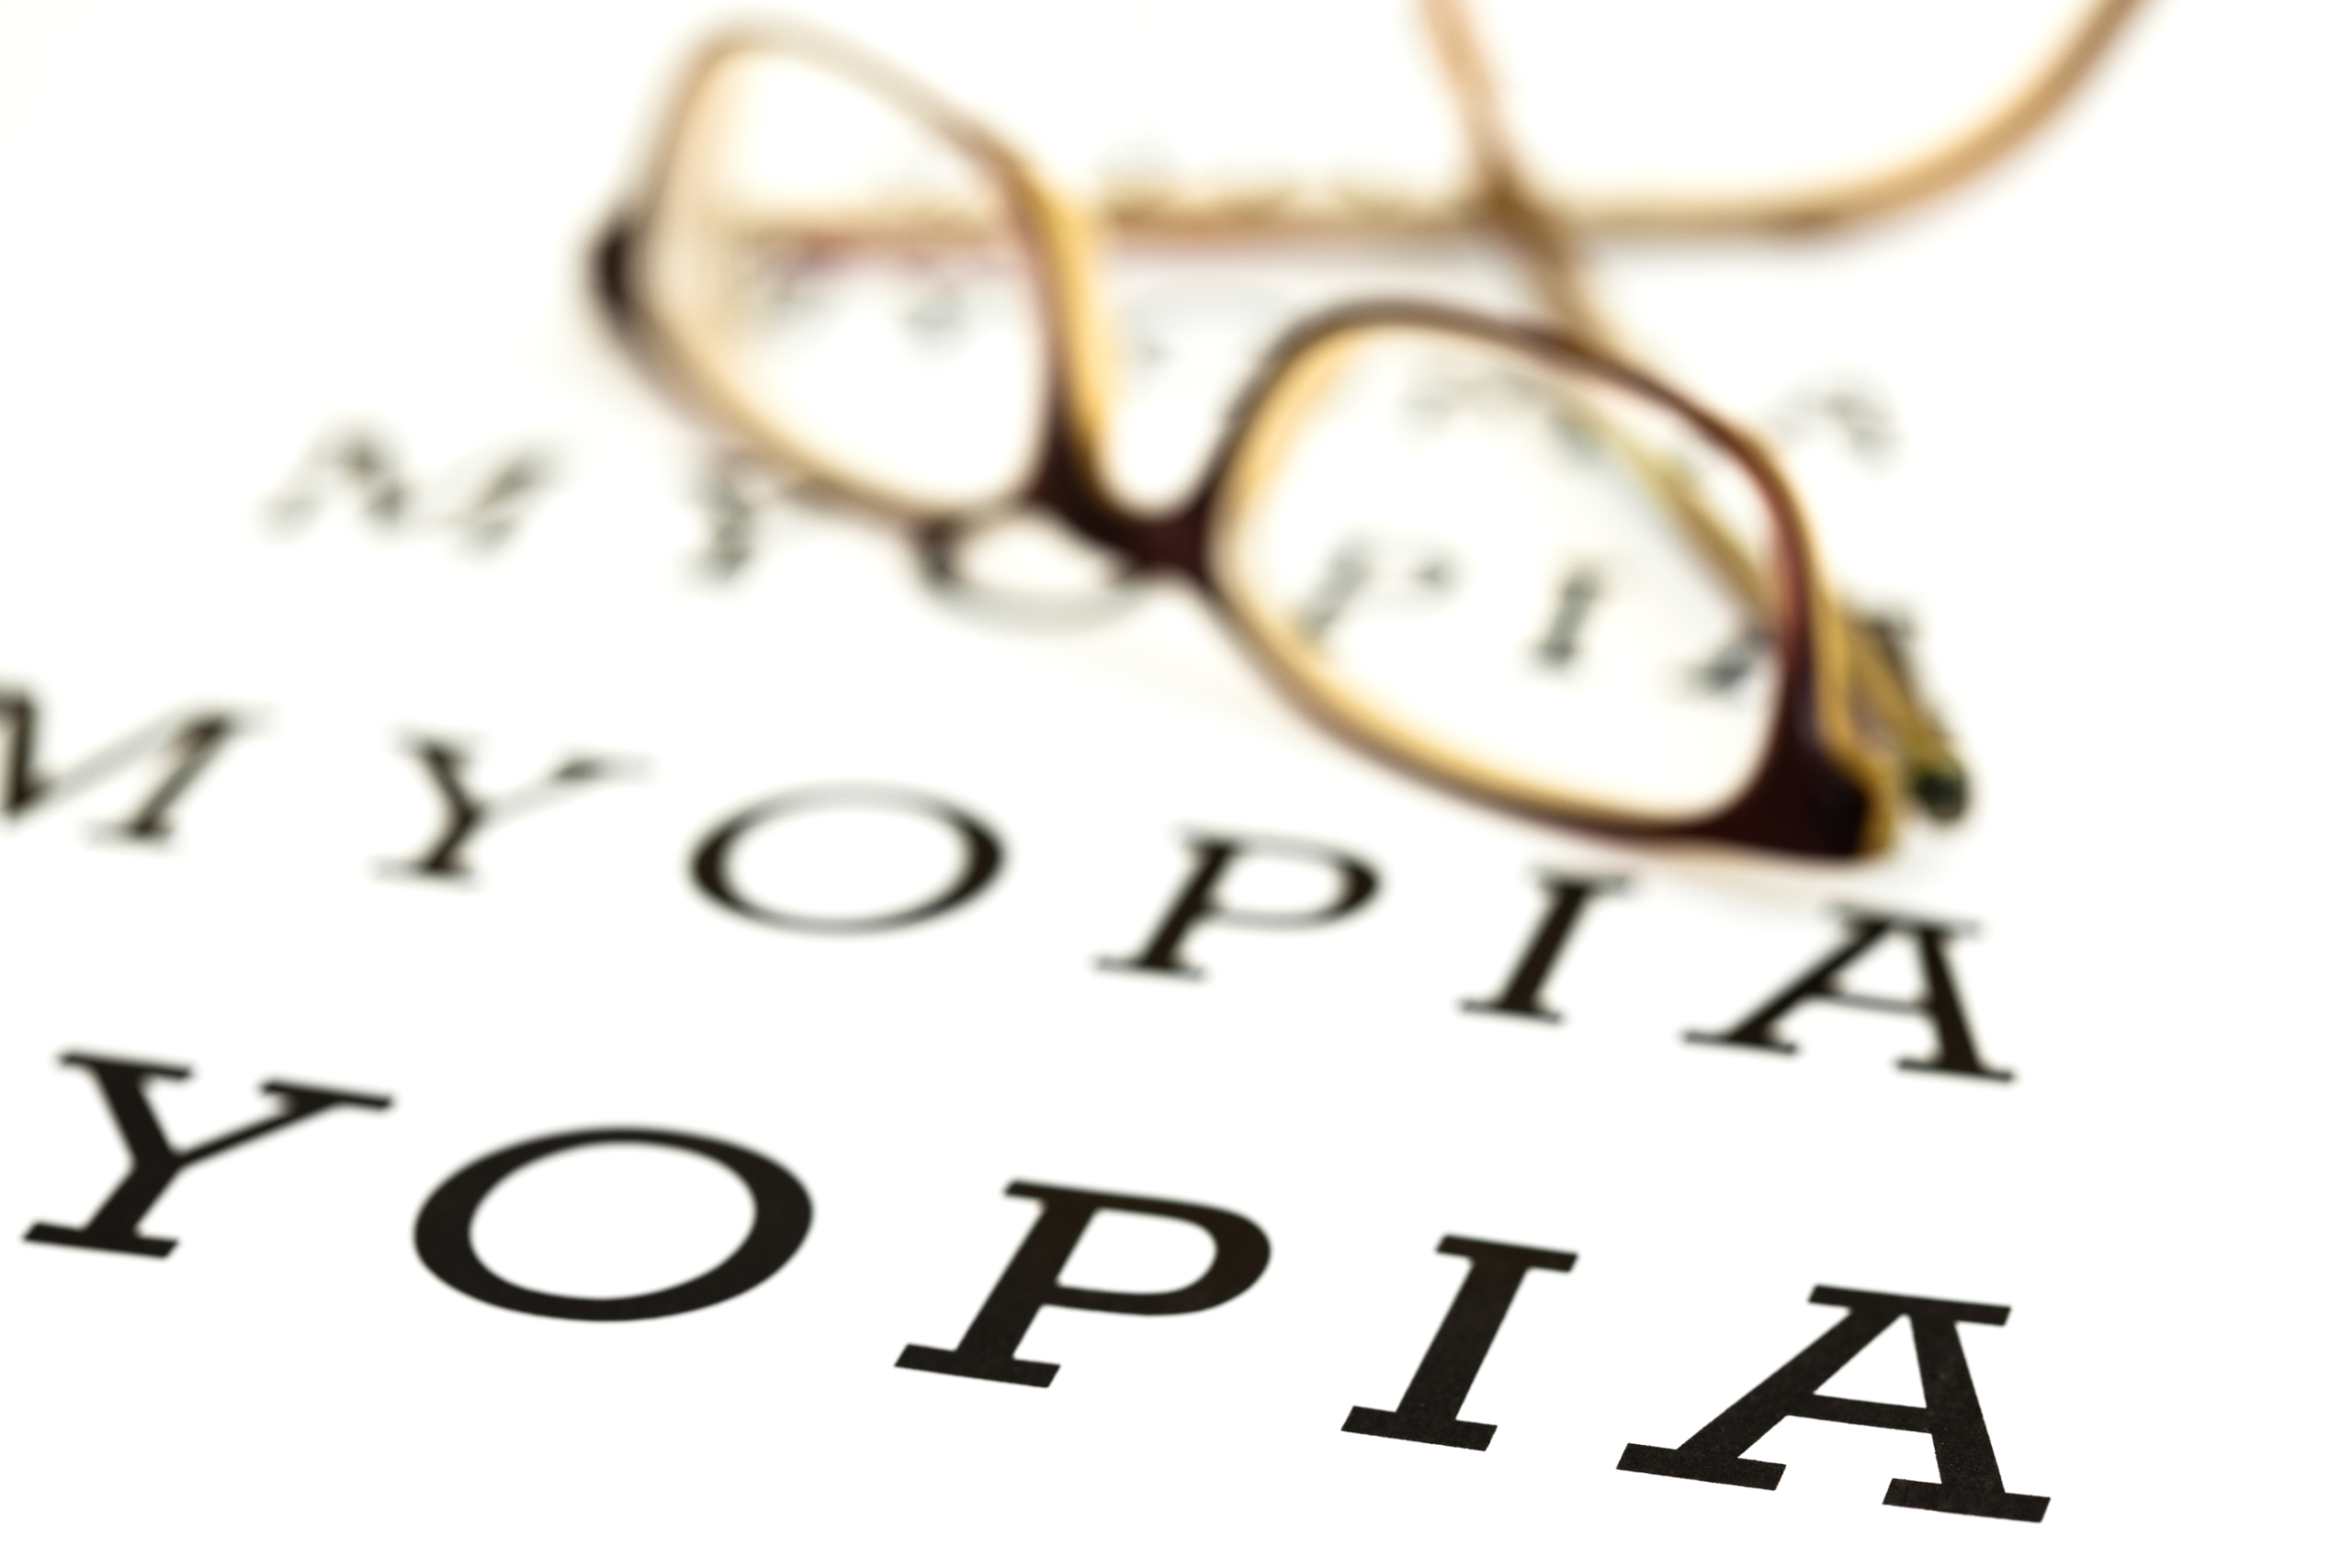 myopia written in eye chart style with a pair of glasses